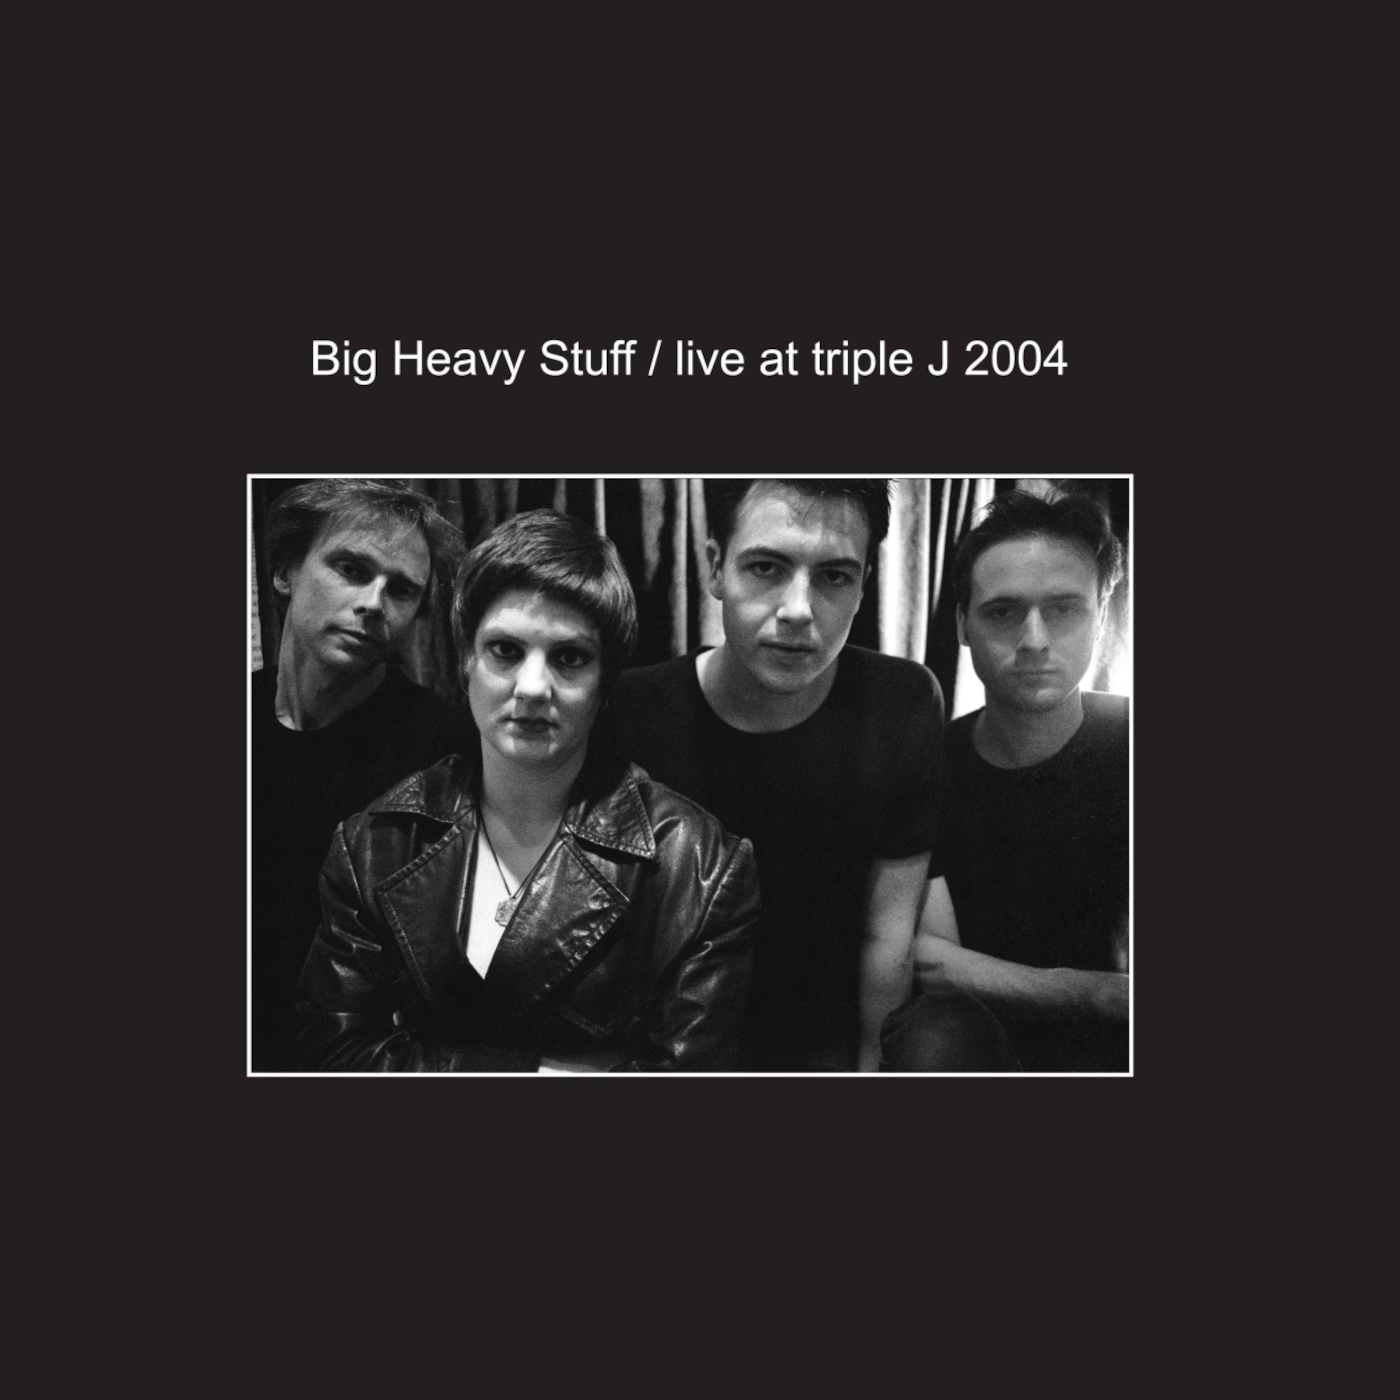 Big Heavy Stuff - Live at triple j 2004 - Limited Edition Compact Disc